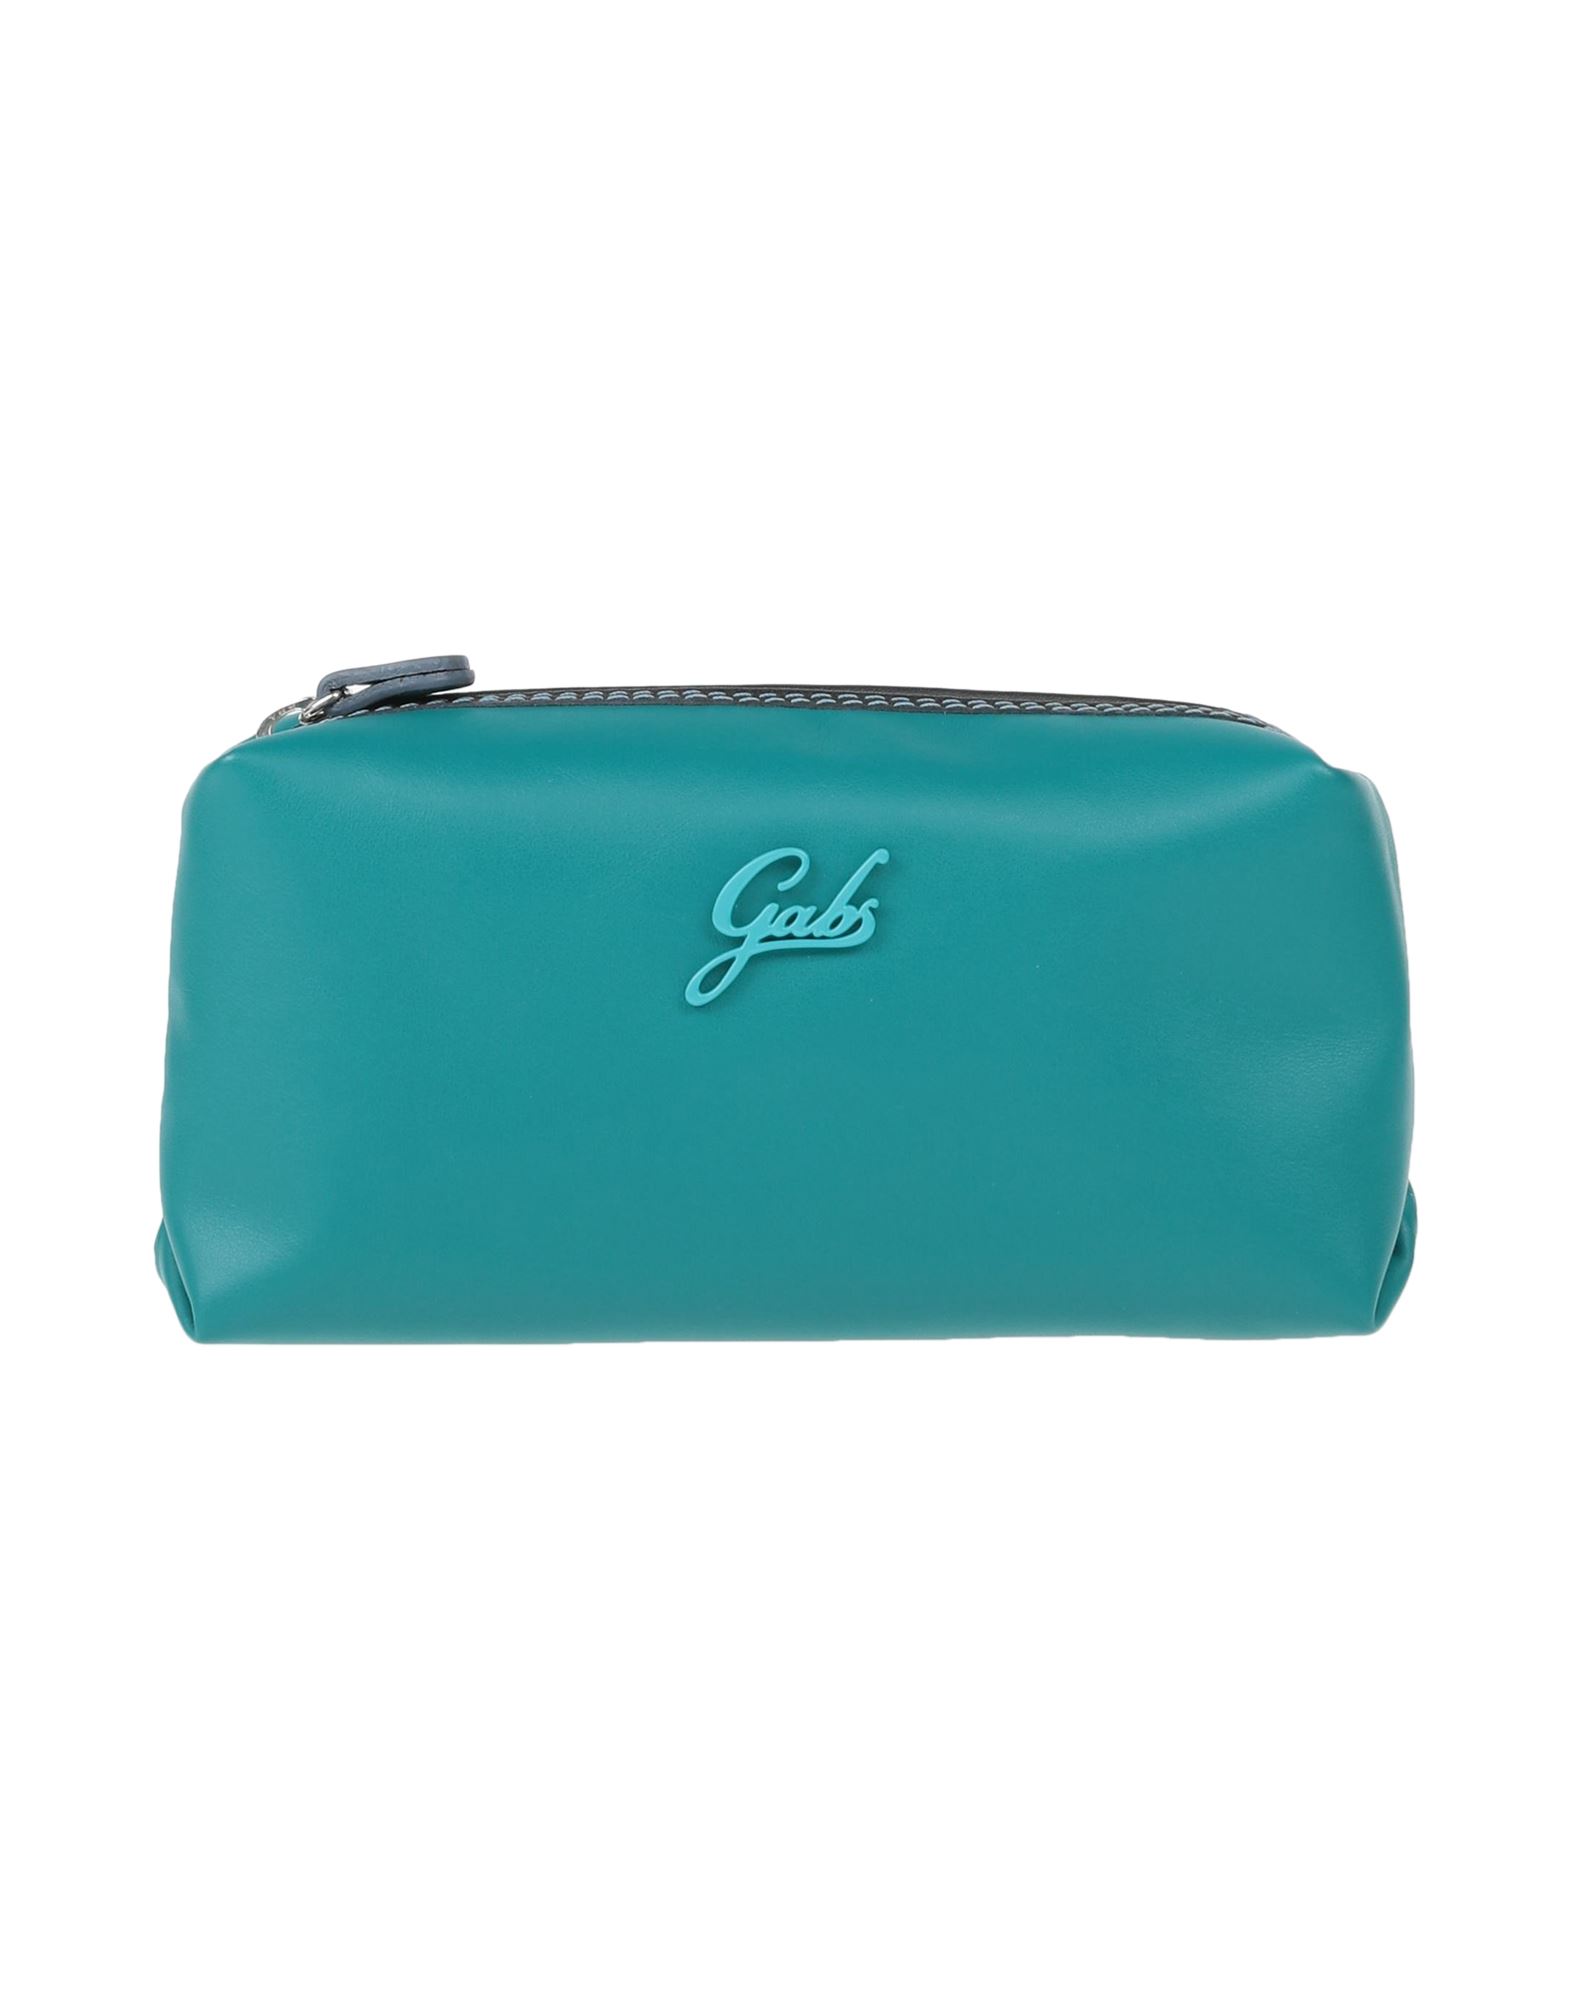 Gabs Beauty Cases In Turquoise